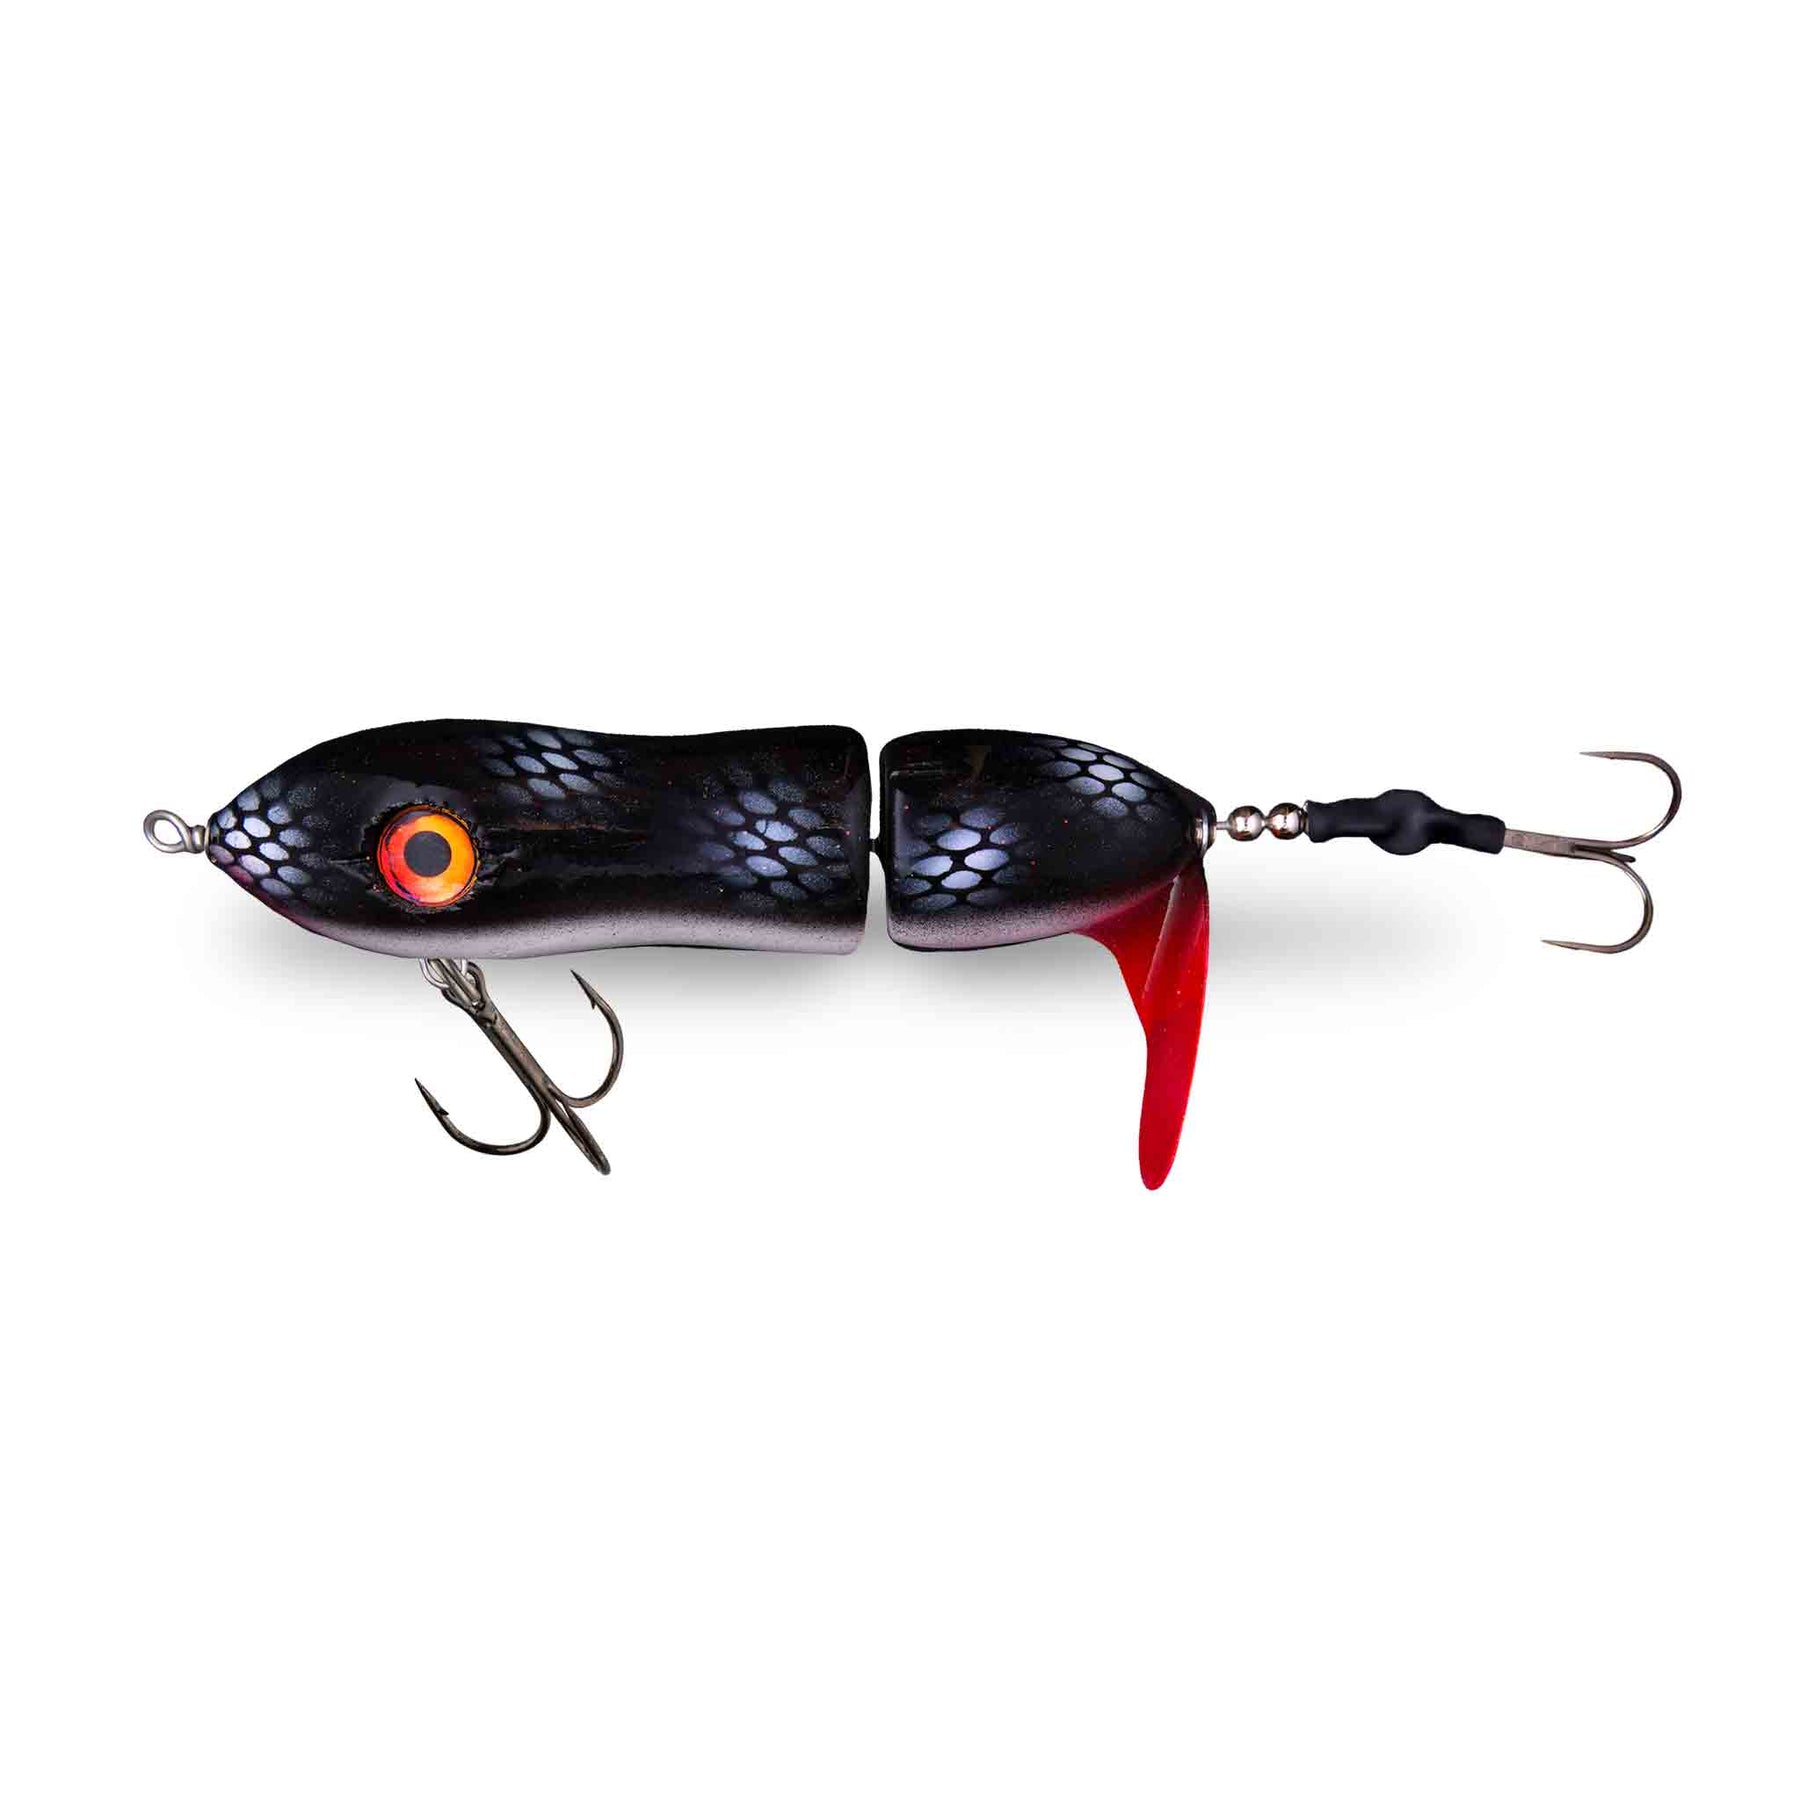 View of Topwater Big Mama Lit'tl Sis'tr Propbait Loon available at EZOKO Pike and Musky Shop